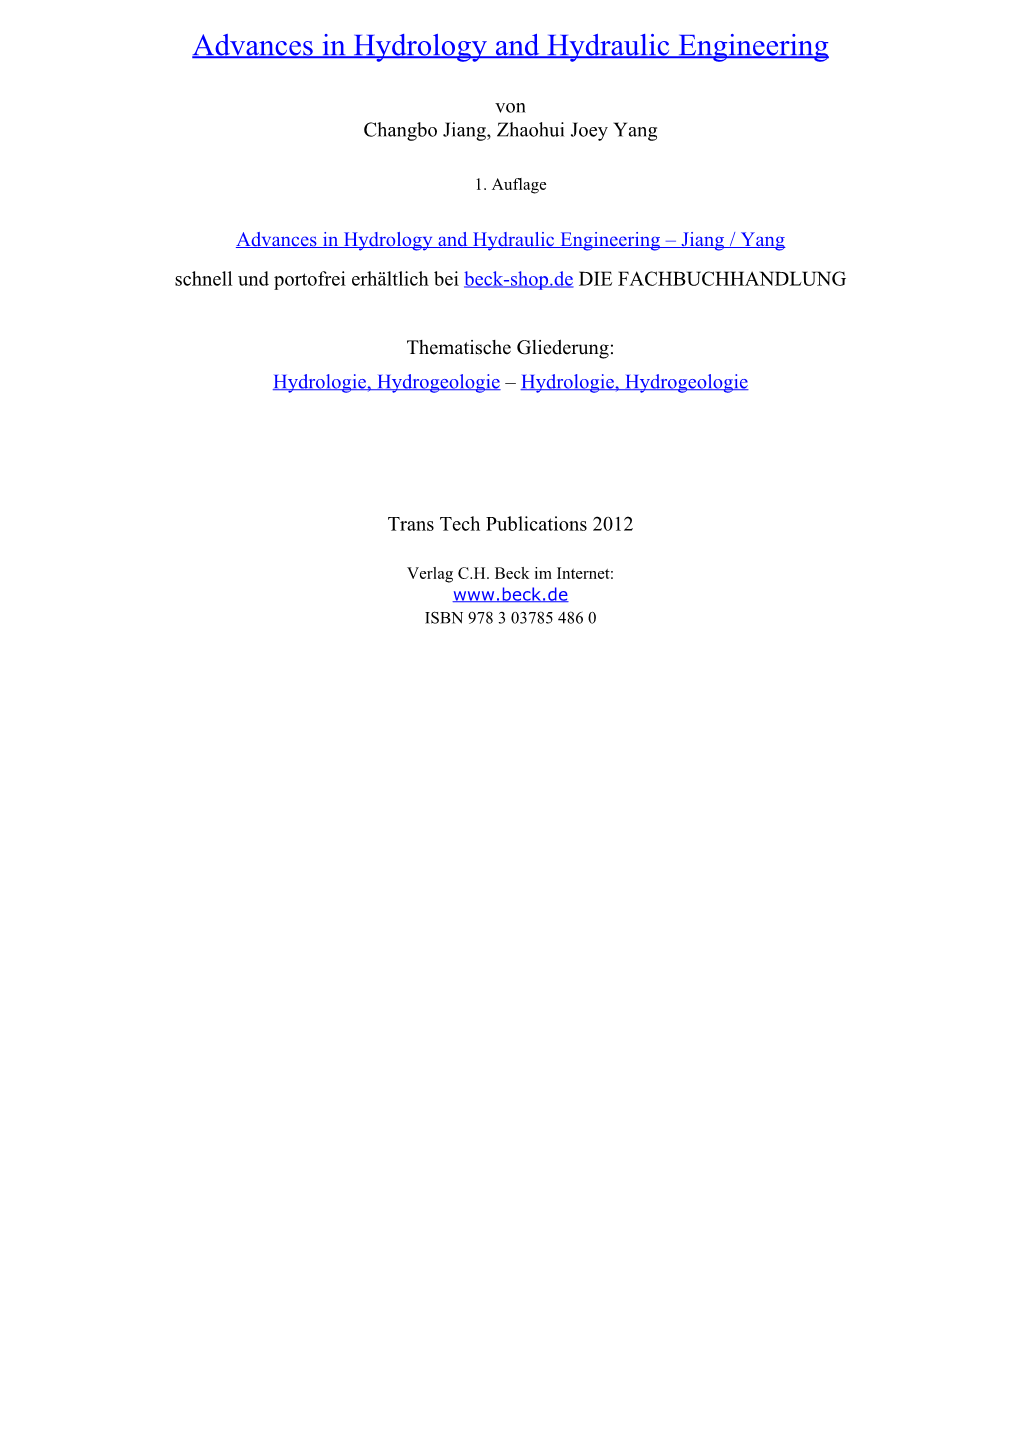 Advances in Hydrology and Hydraulic Engineering